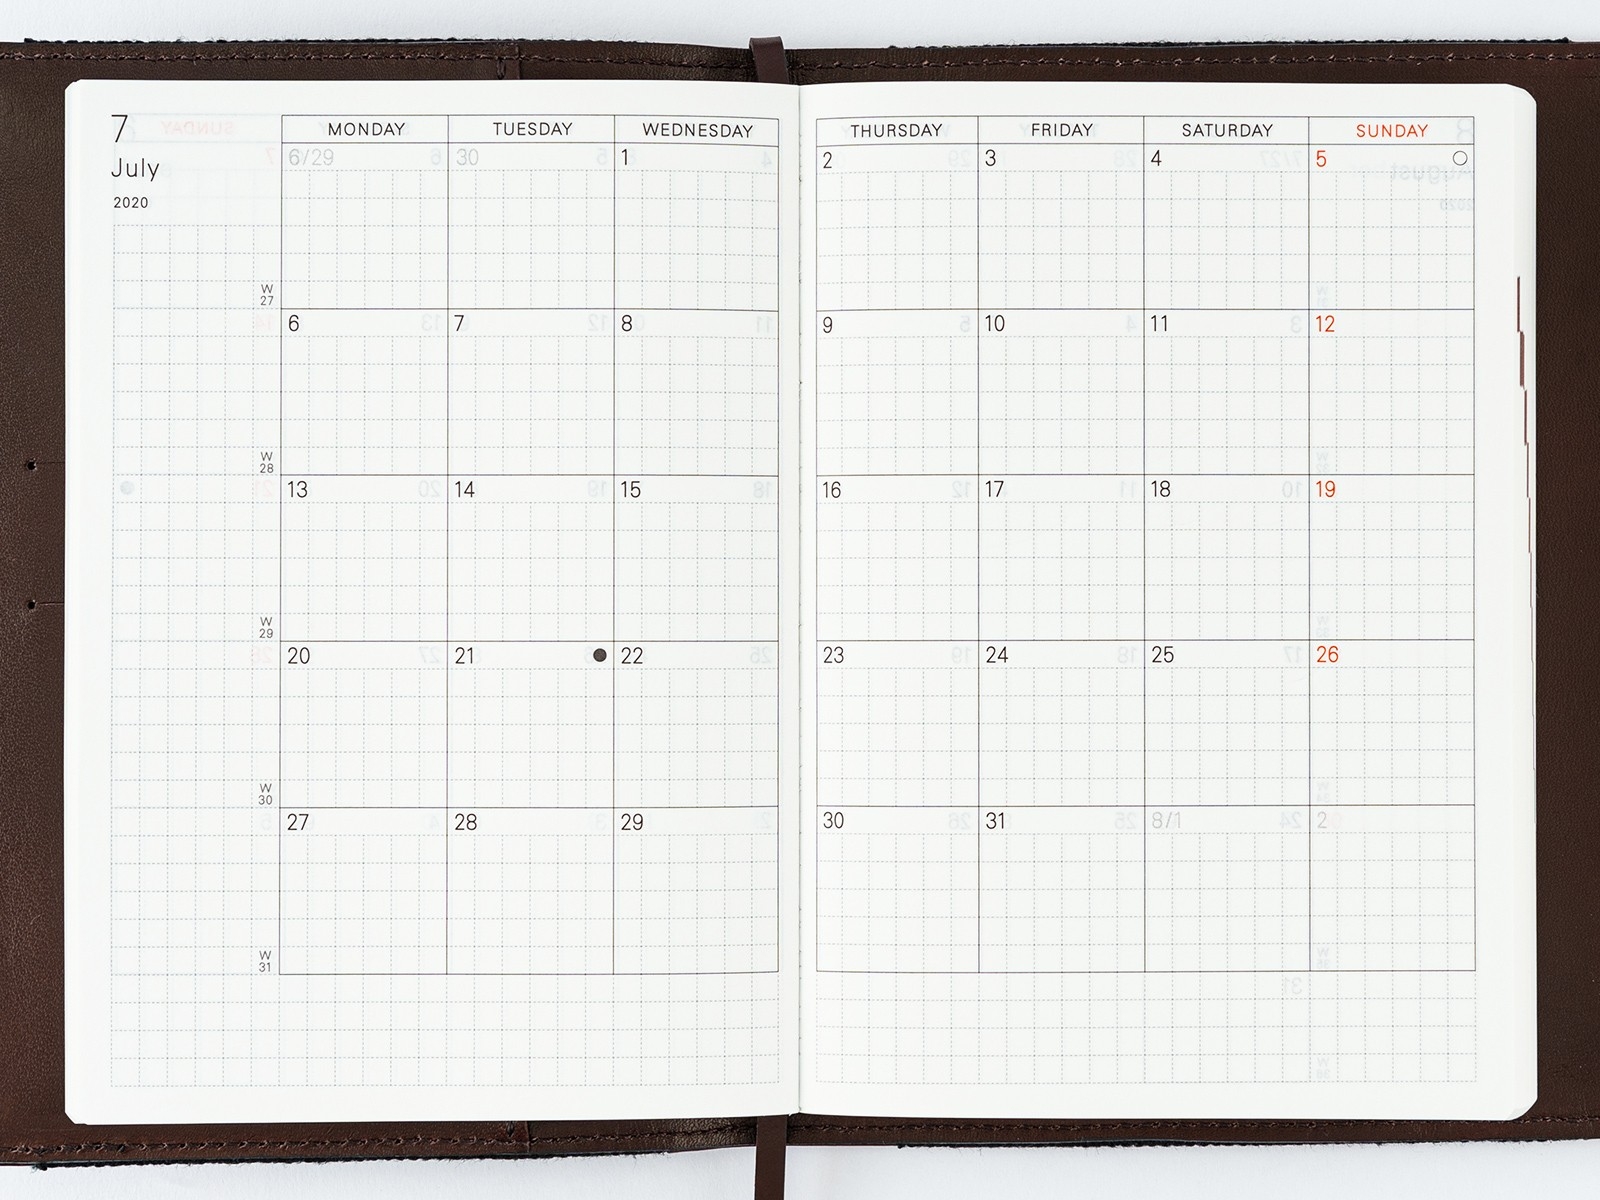 Planner / Monthly Calendar - Book Buying Guide - Hobonichi-2020 Monthly Calendars With Time Slots